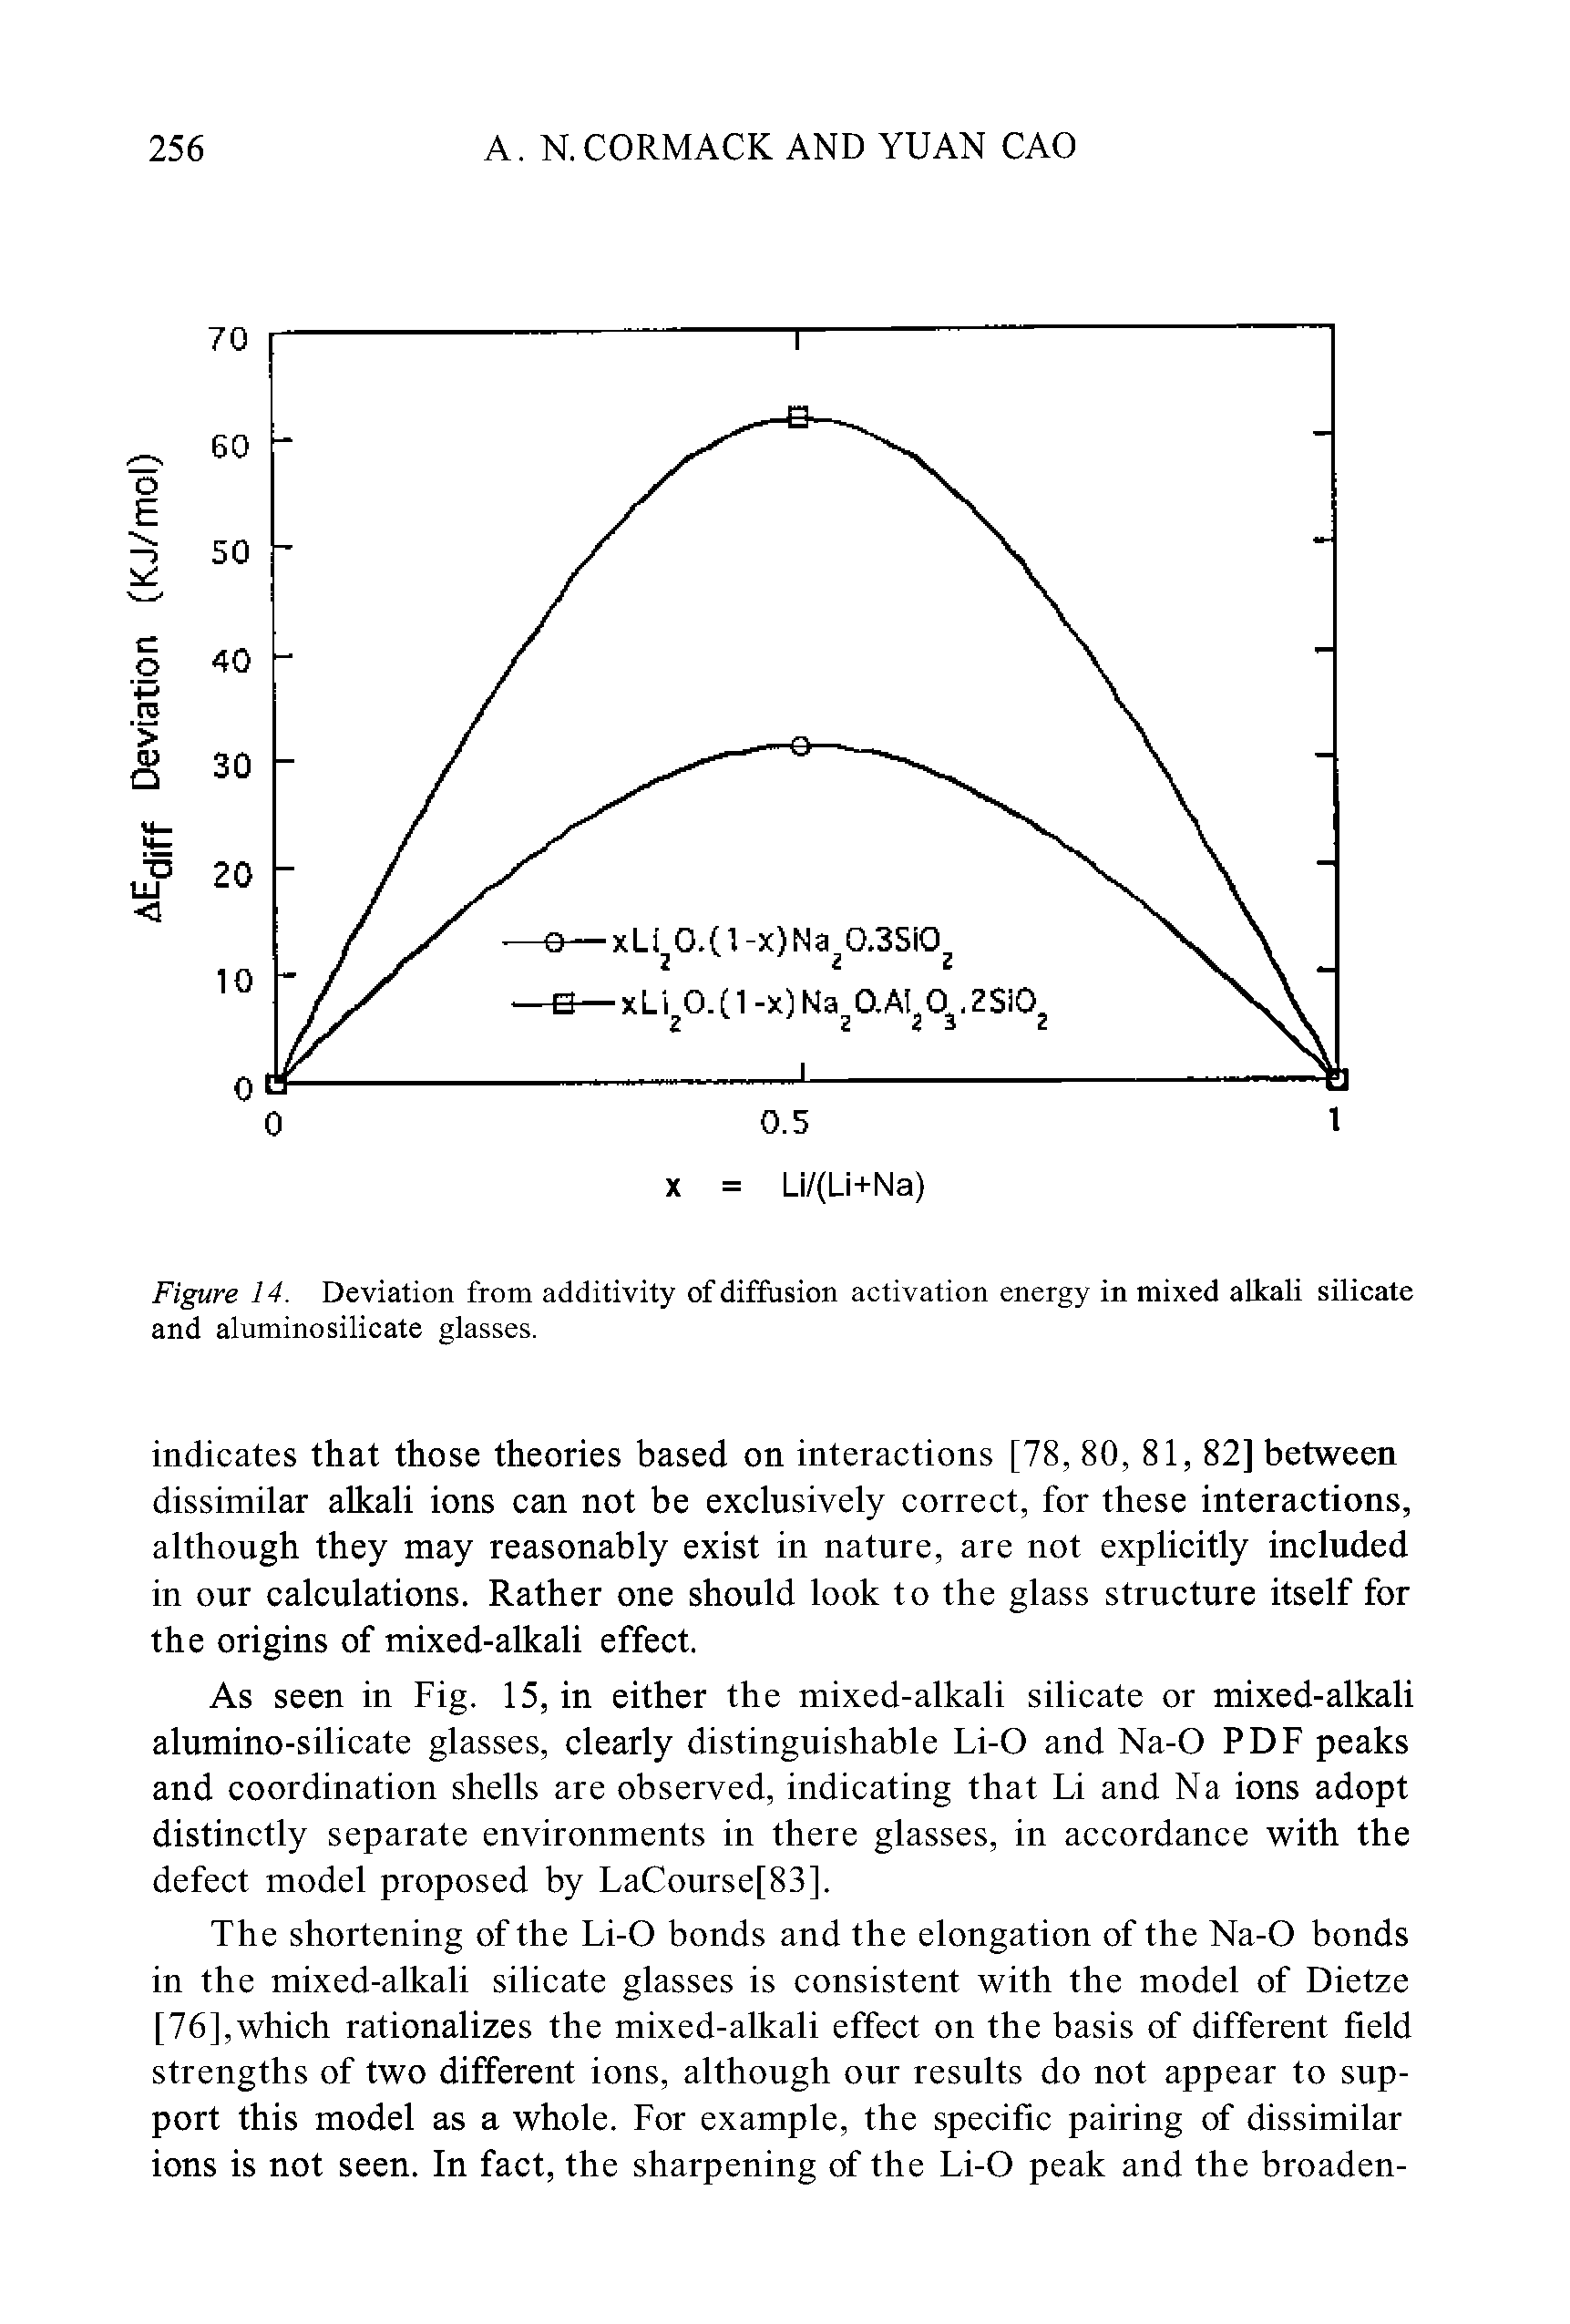 Figure 14. Deviation from additivity of diffusion activation energy in mixed alkali silicate and aluminosilicate glasses.